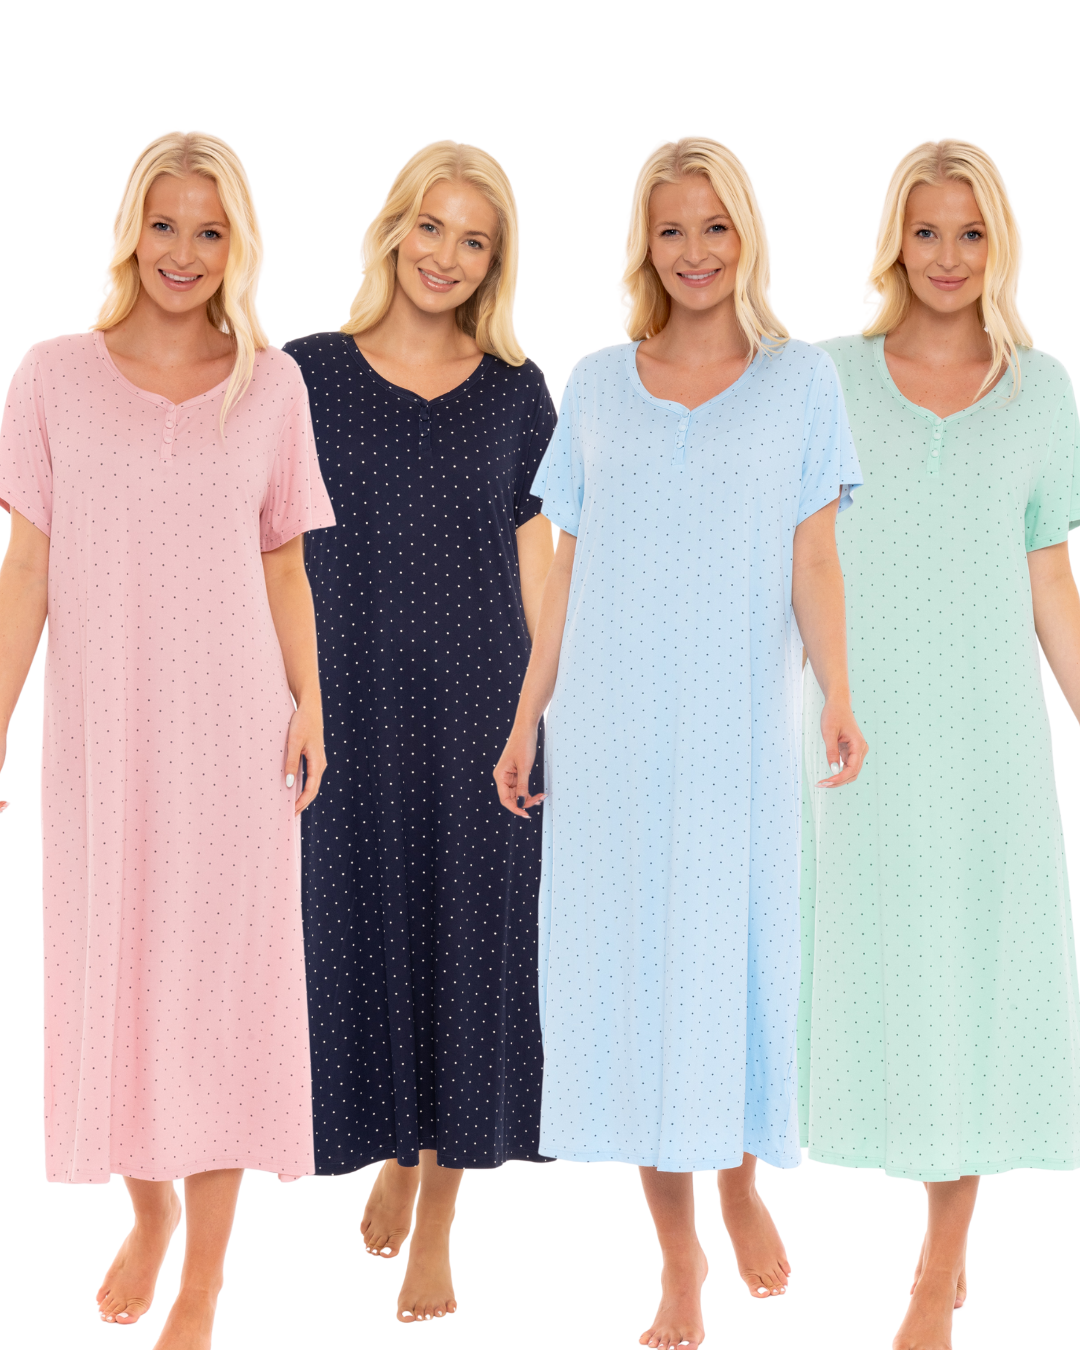 Long Plus Size Luxury Soft Touch Jersey Nightshirt